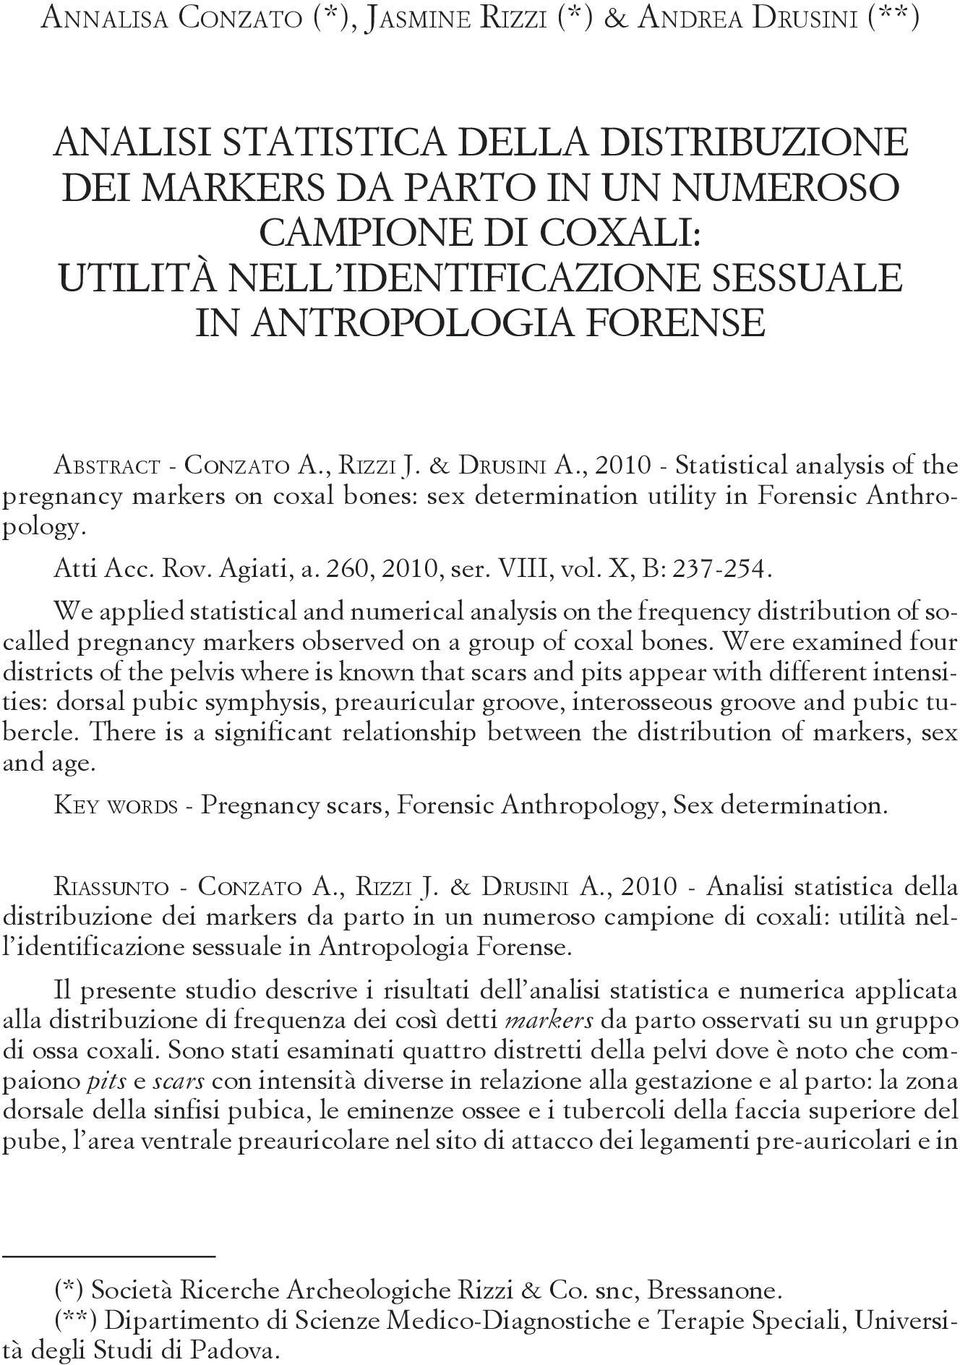 SESSUALE IN ANTROPOLOGIA FORENSE ABSTRACT - CONZATO A., RIZZI J. & DRUSINI A., 2010 - Statistical analysis of the pregnancy markers on coxal bones: sex determination utility in Forensic Anthropology.